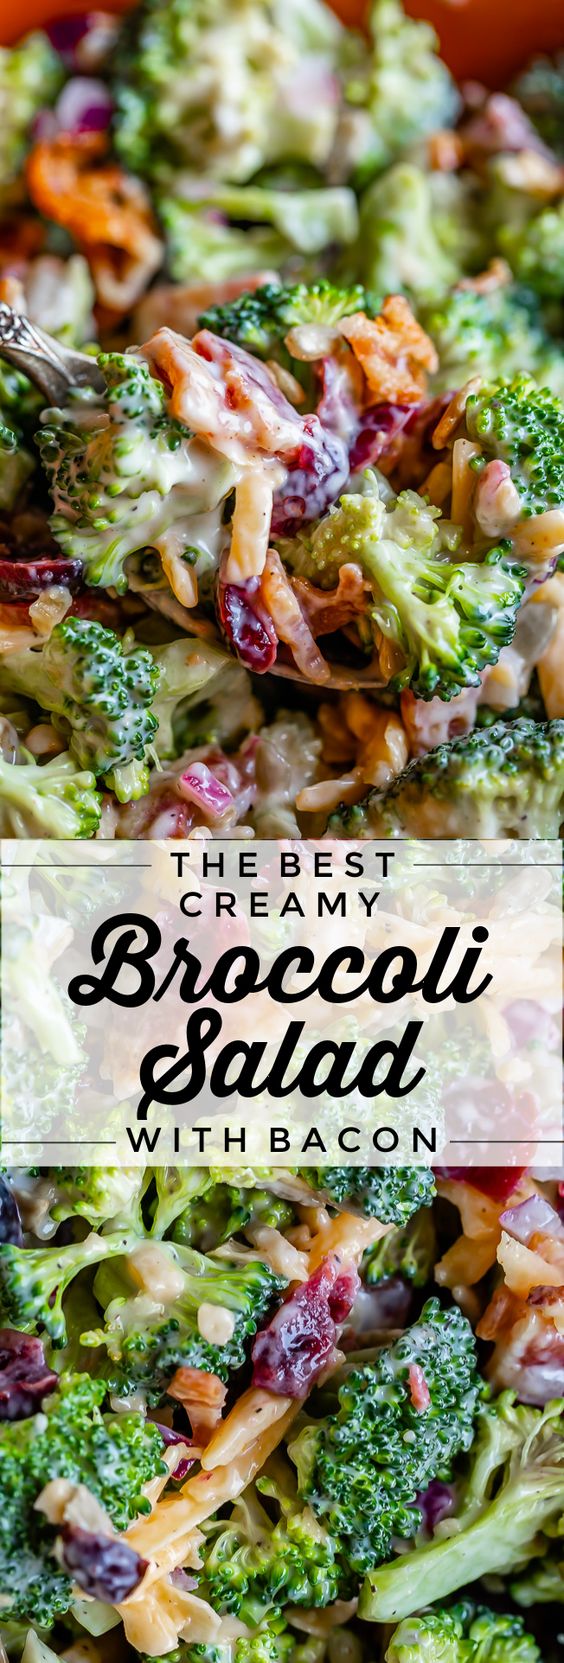 Everyone needs an easy recipe for Broccoli Salad! This side dish stuffed with bacon, cranberry, and cheese is a huge crowd-pleaser.